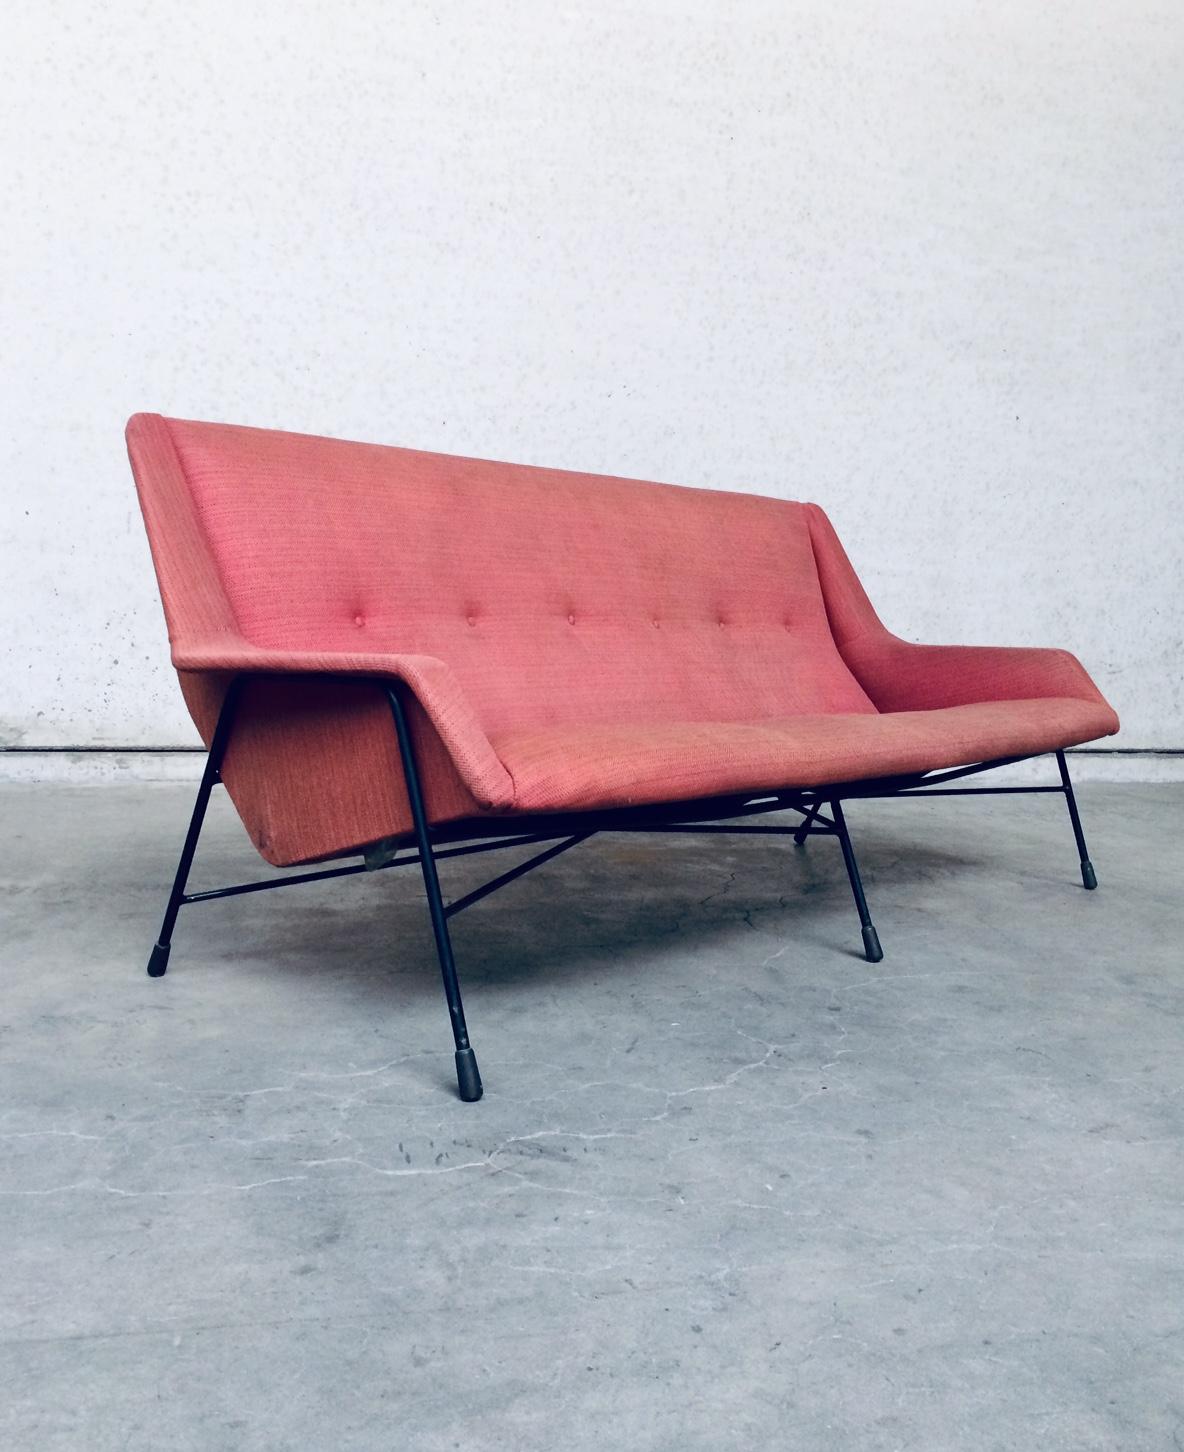 Metal S12 Model 3 Seat Sofa by Alfred Hendrickx for Belform, Belgium, 1958 For Sale